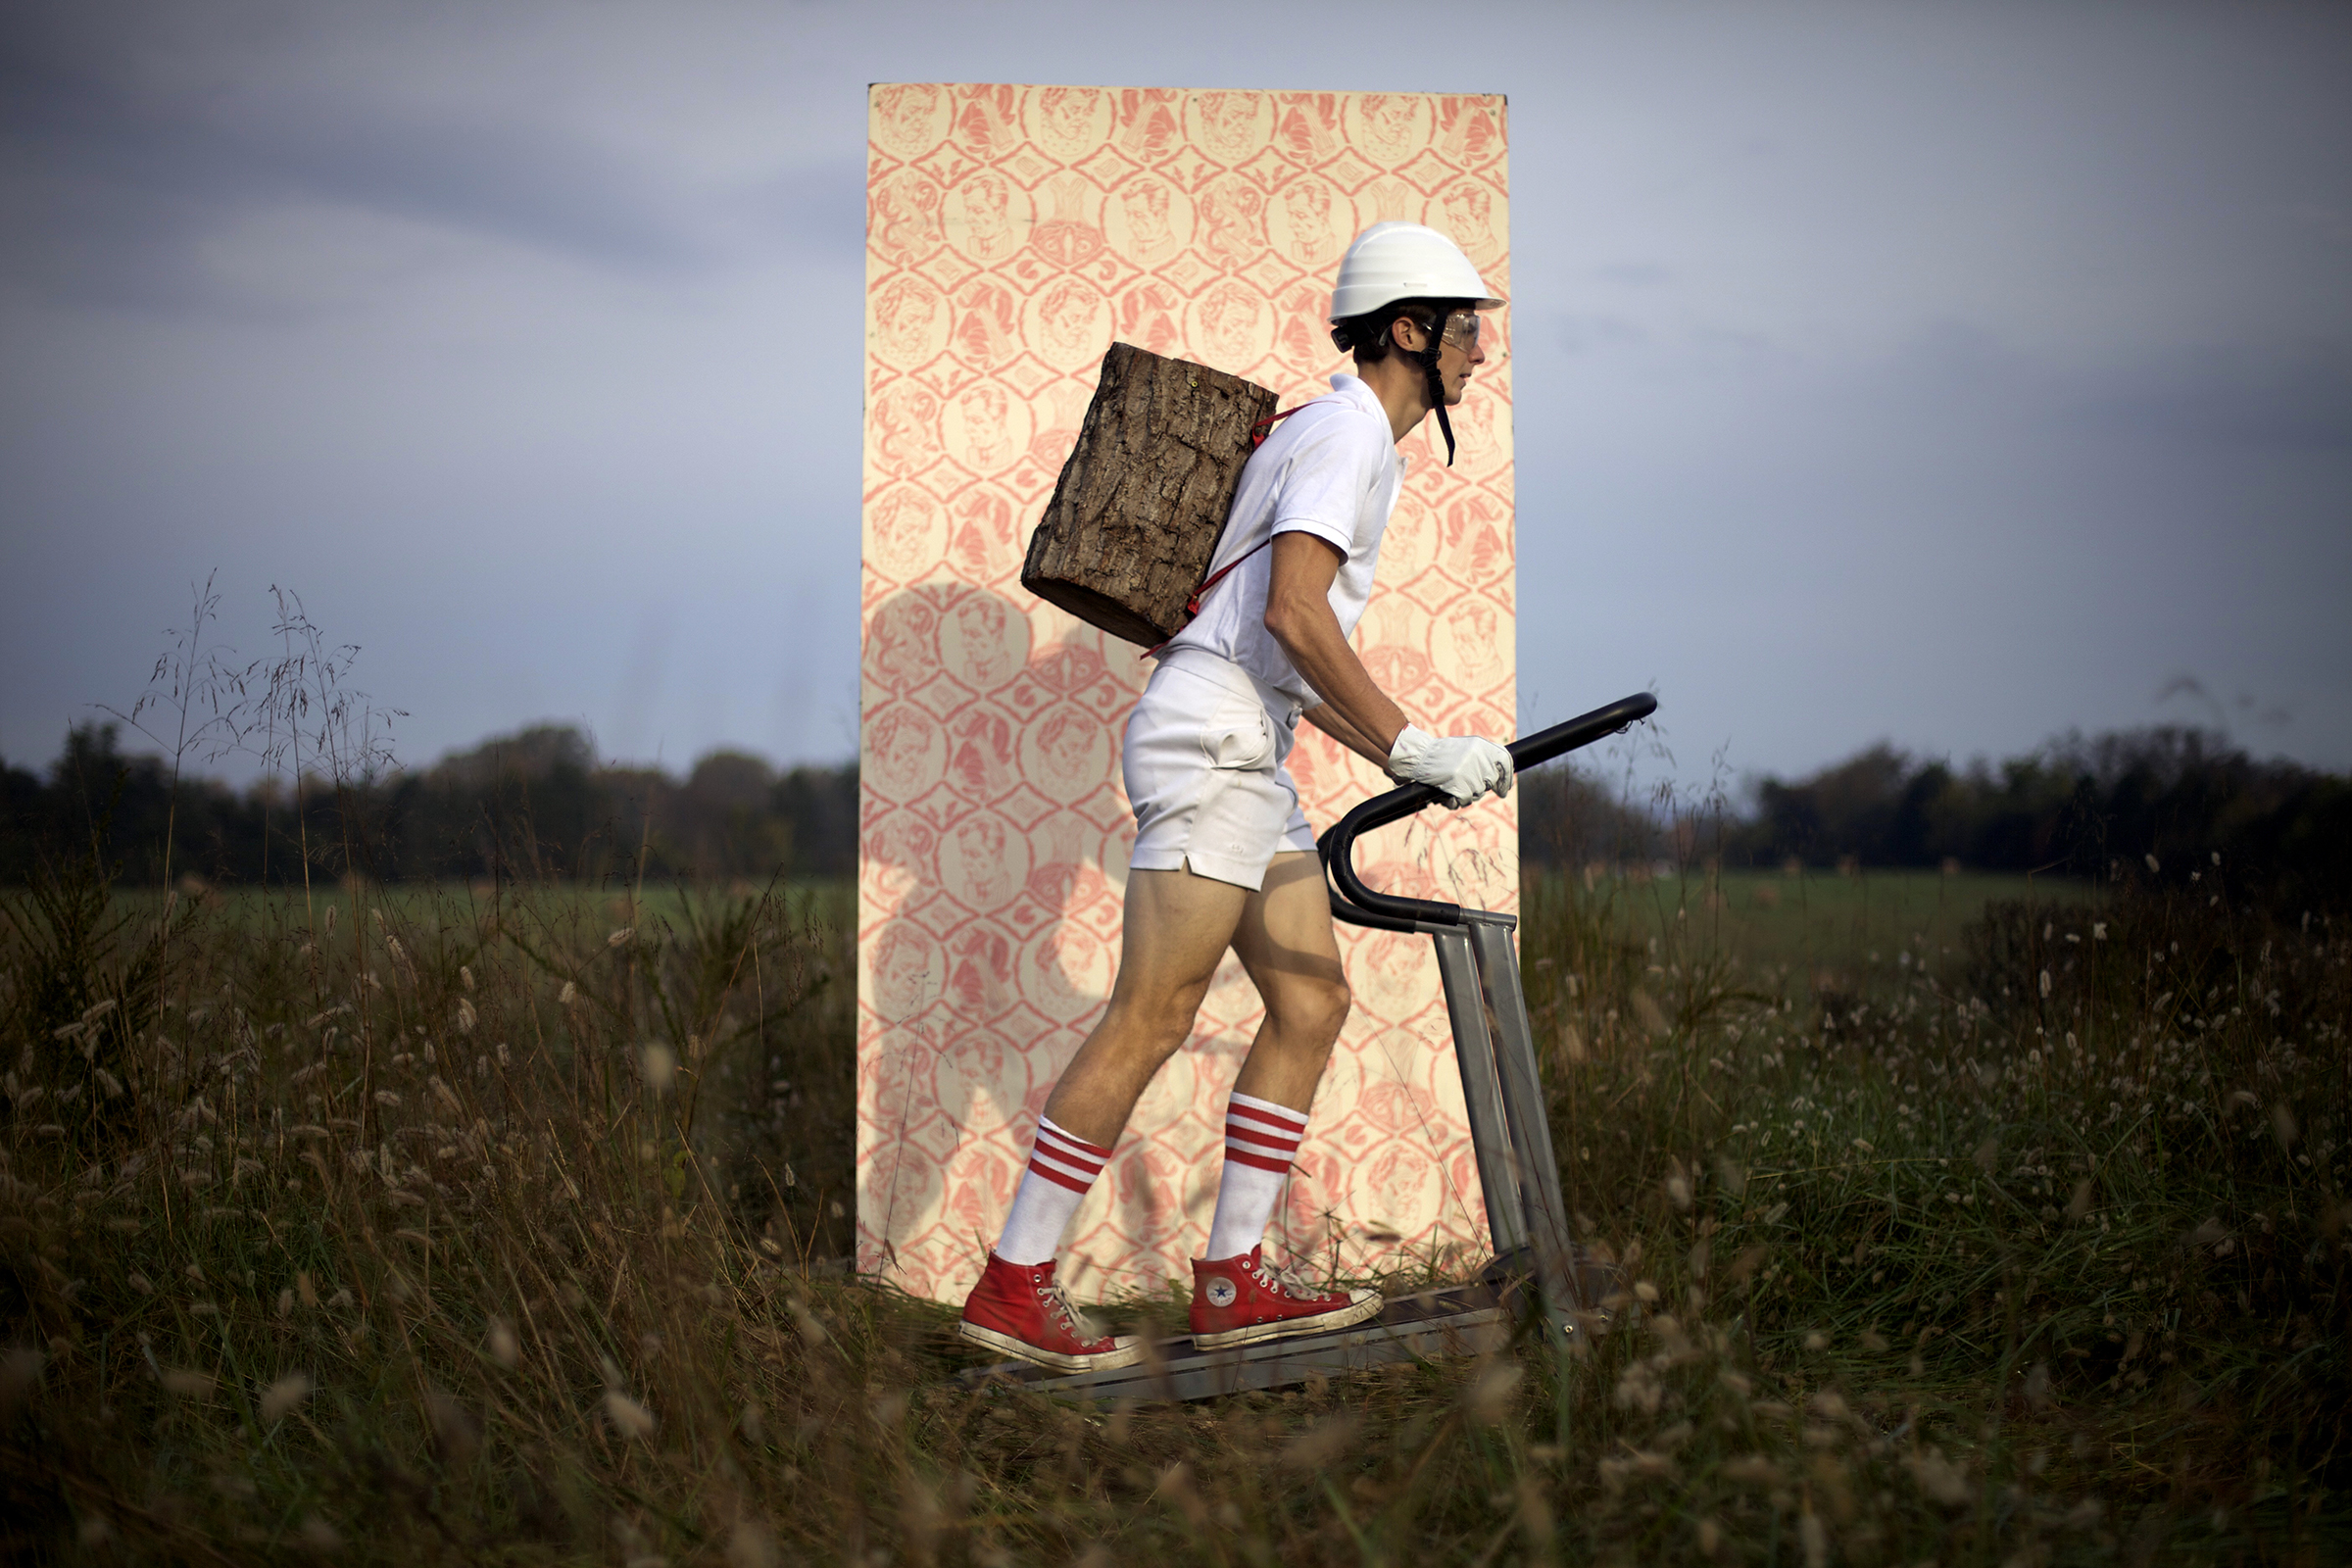 A photograph of a person walking on a treadmill in a field while carrying a log on his back